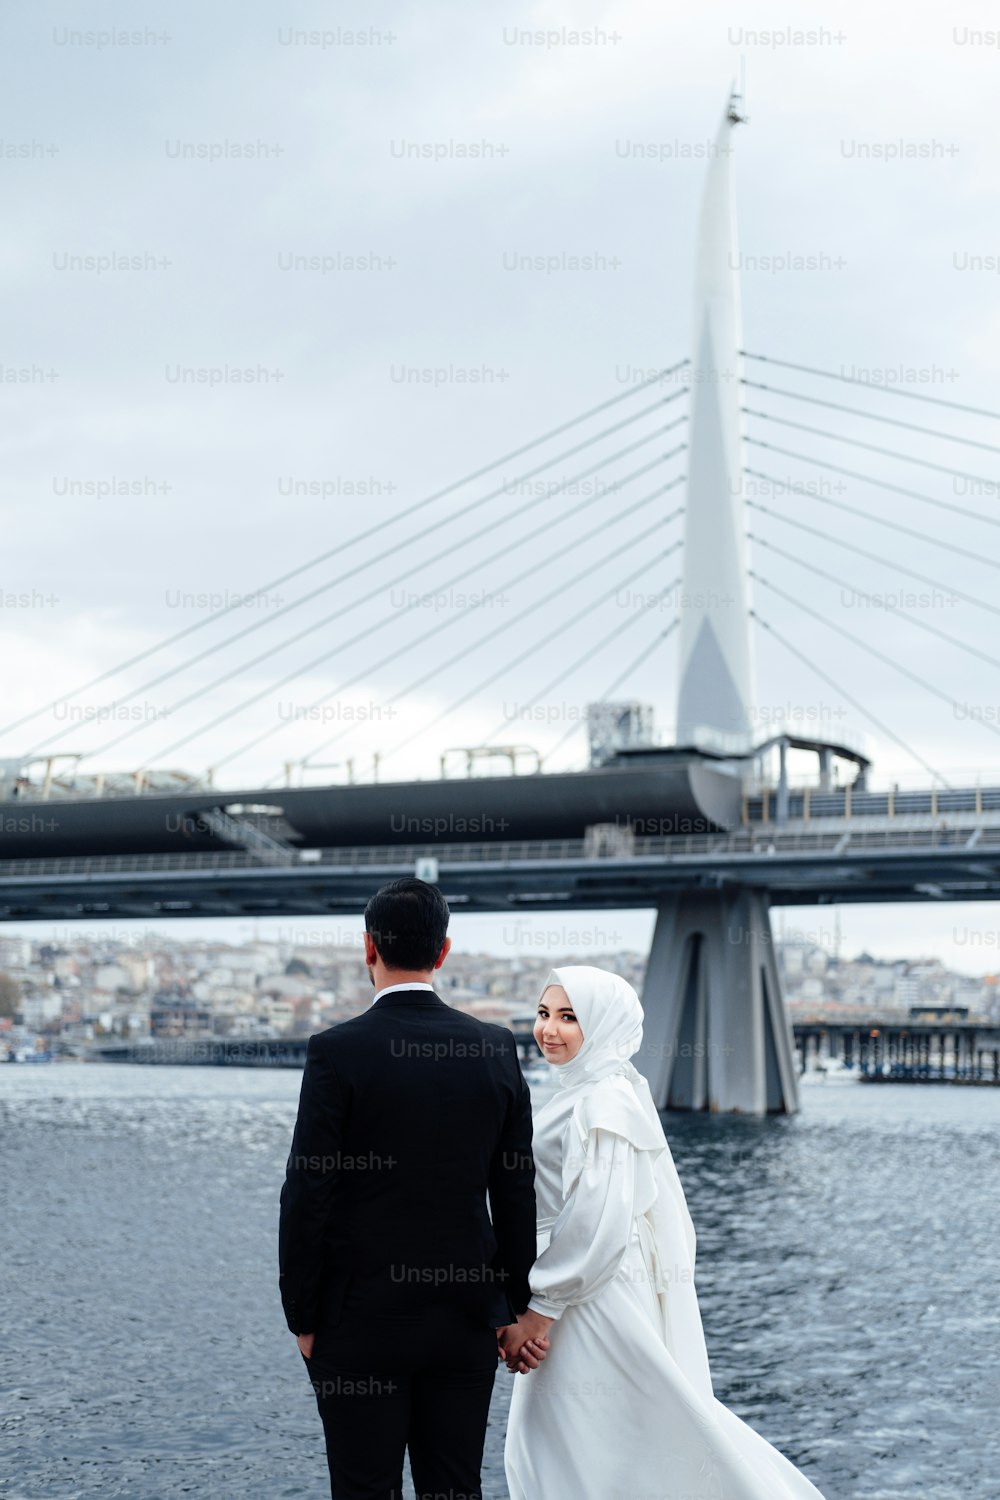 a man and woman walking on a bridge with a large bridge in the background